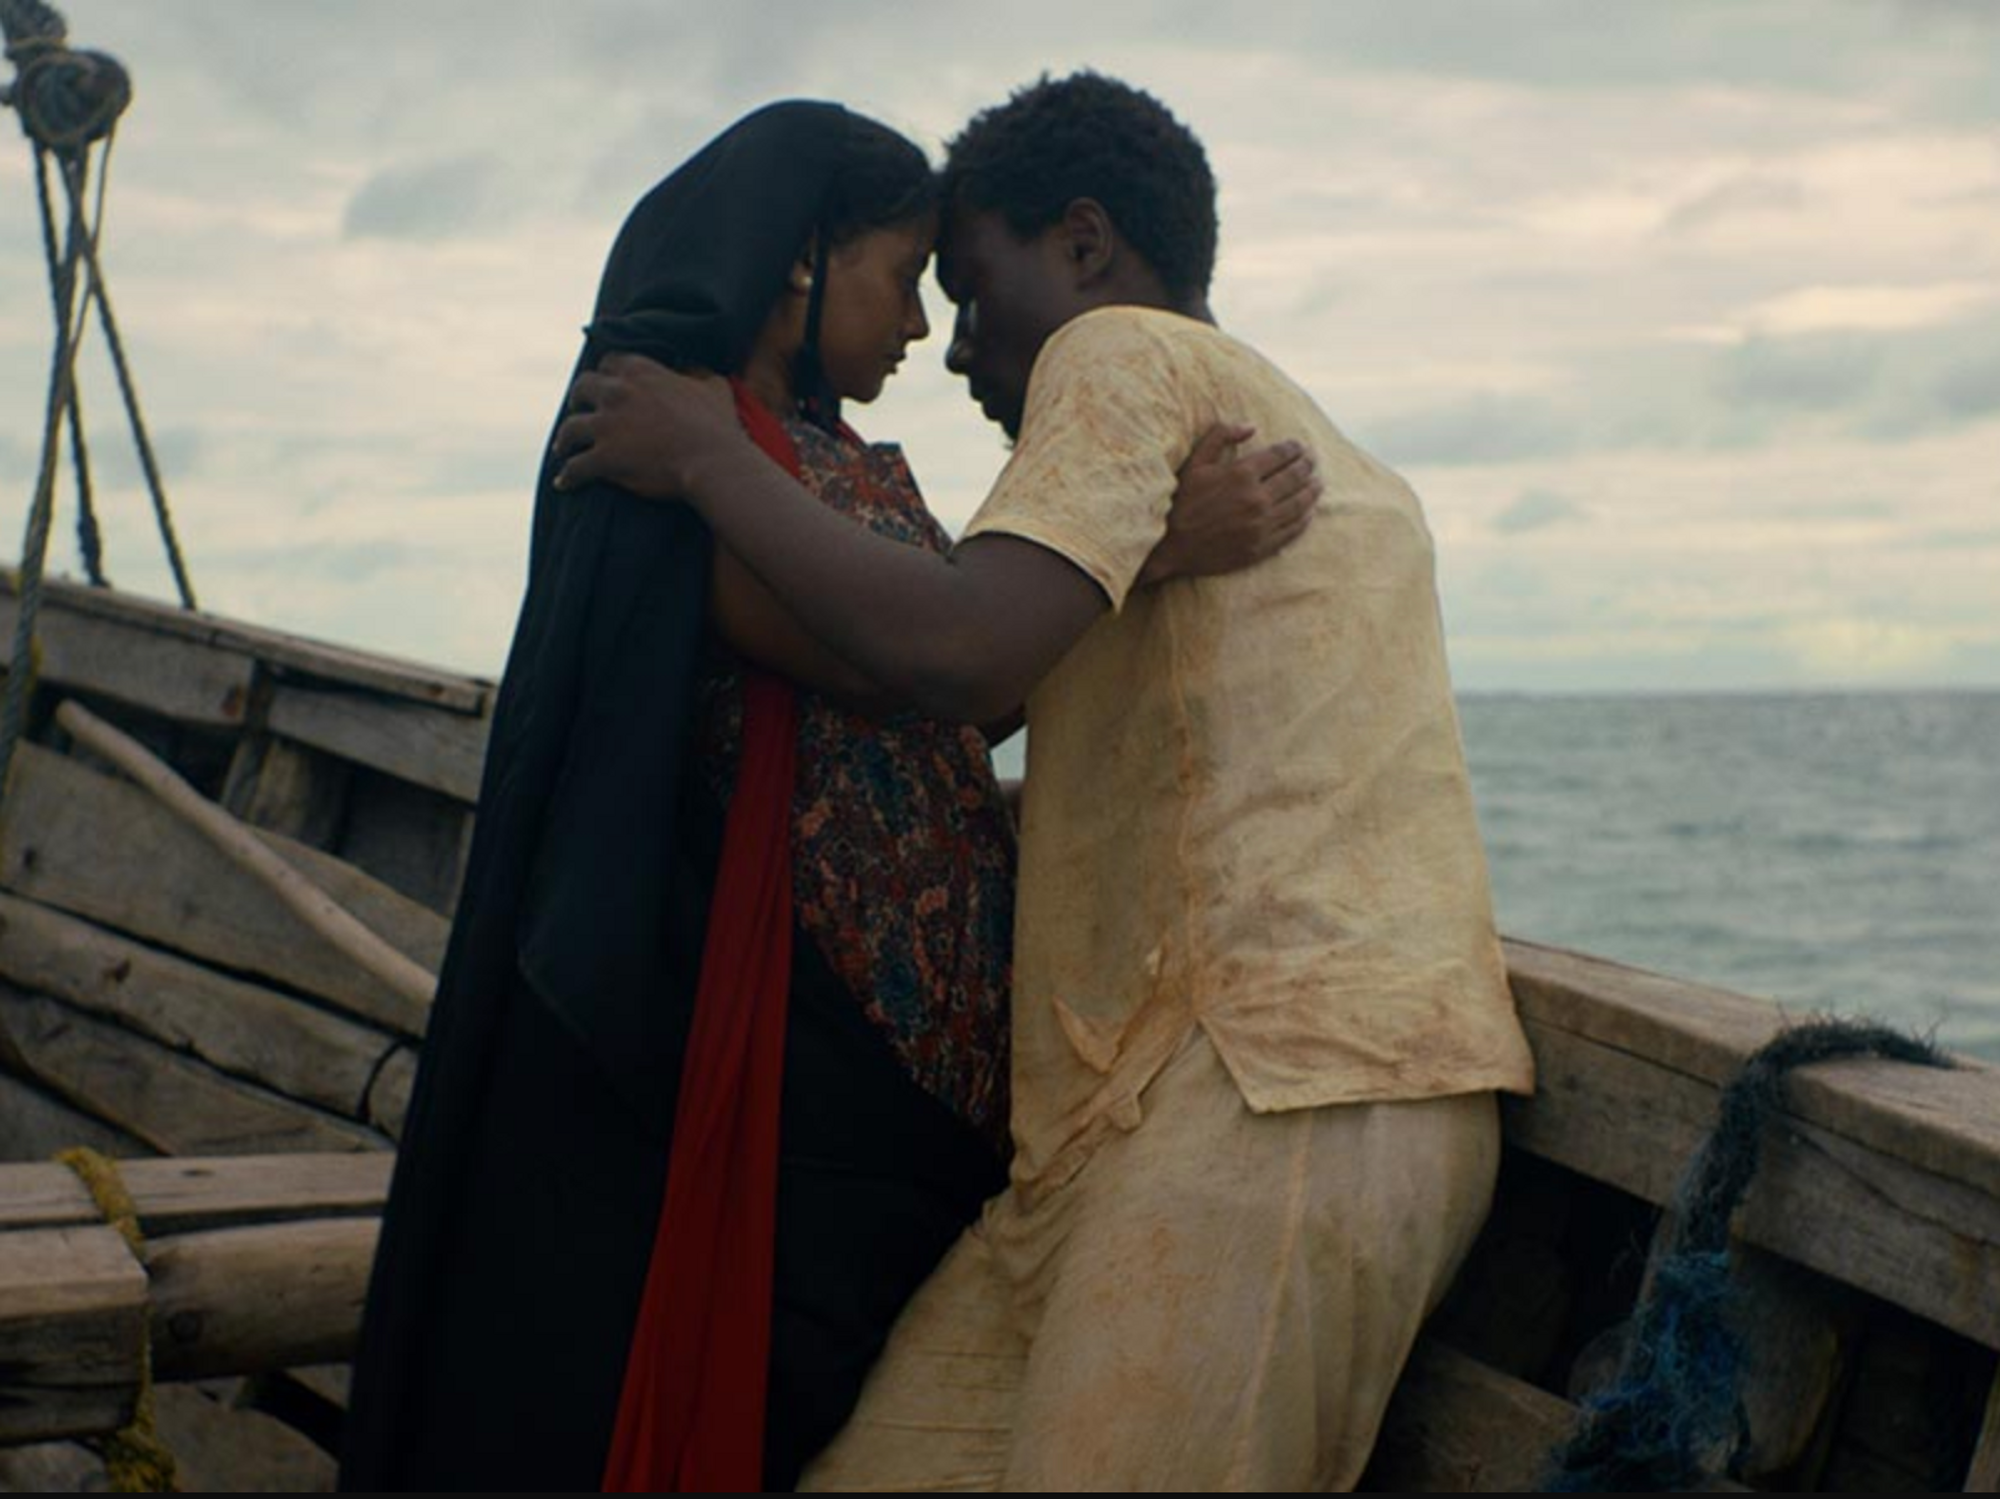 Tanzanian Filmmaker Amil Shivji is Making History with a Story of Love and Resistance